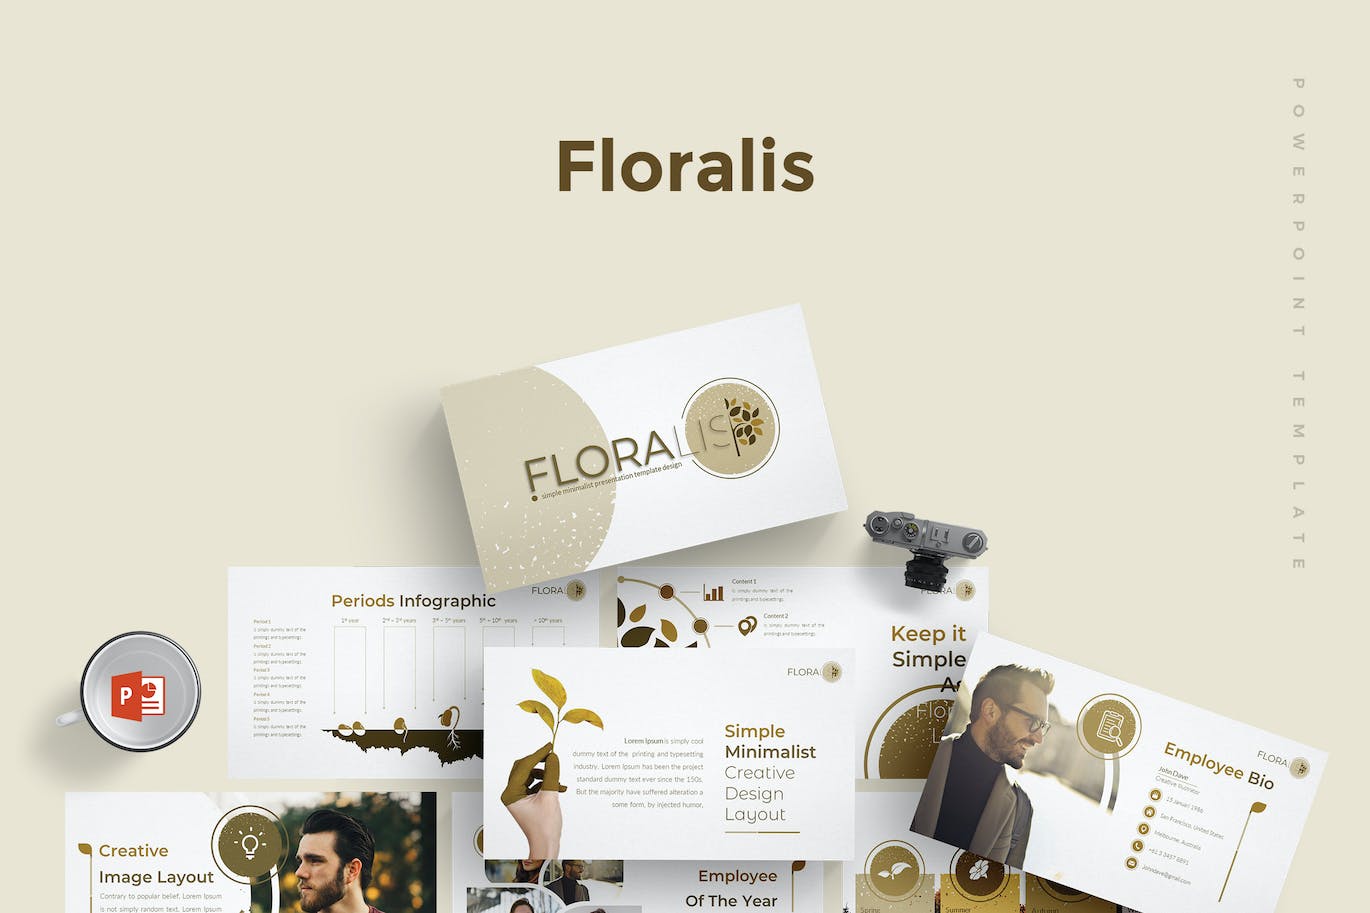 A set of images of exquisite presentation template slides on the theme of floristry.